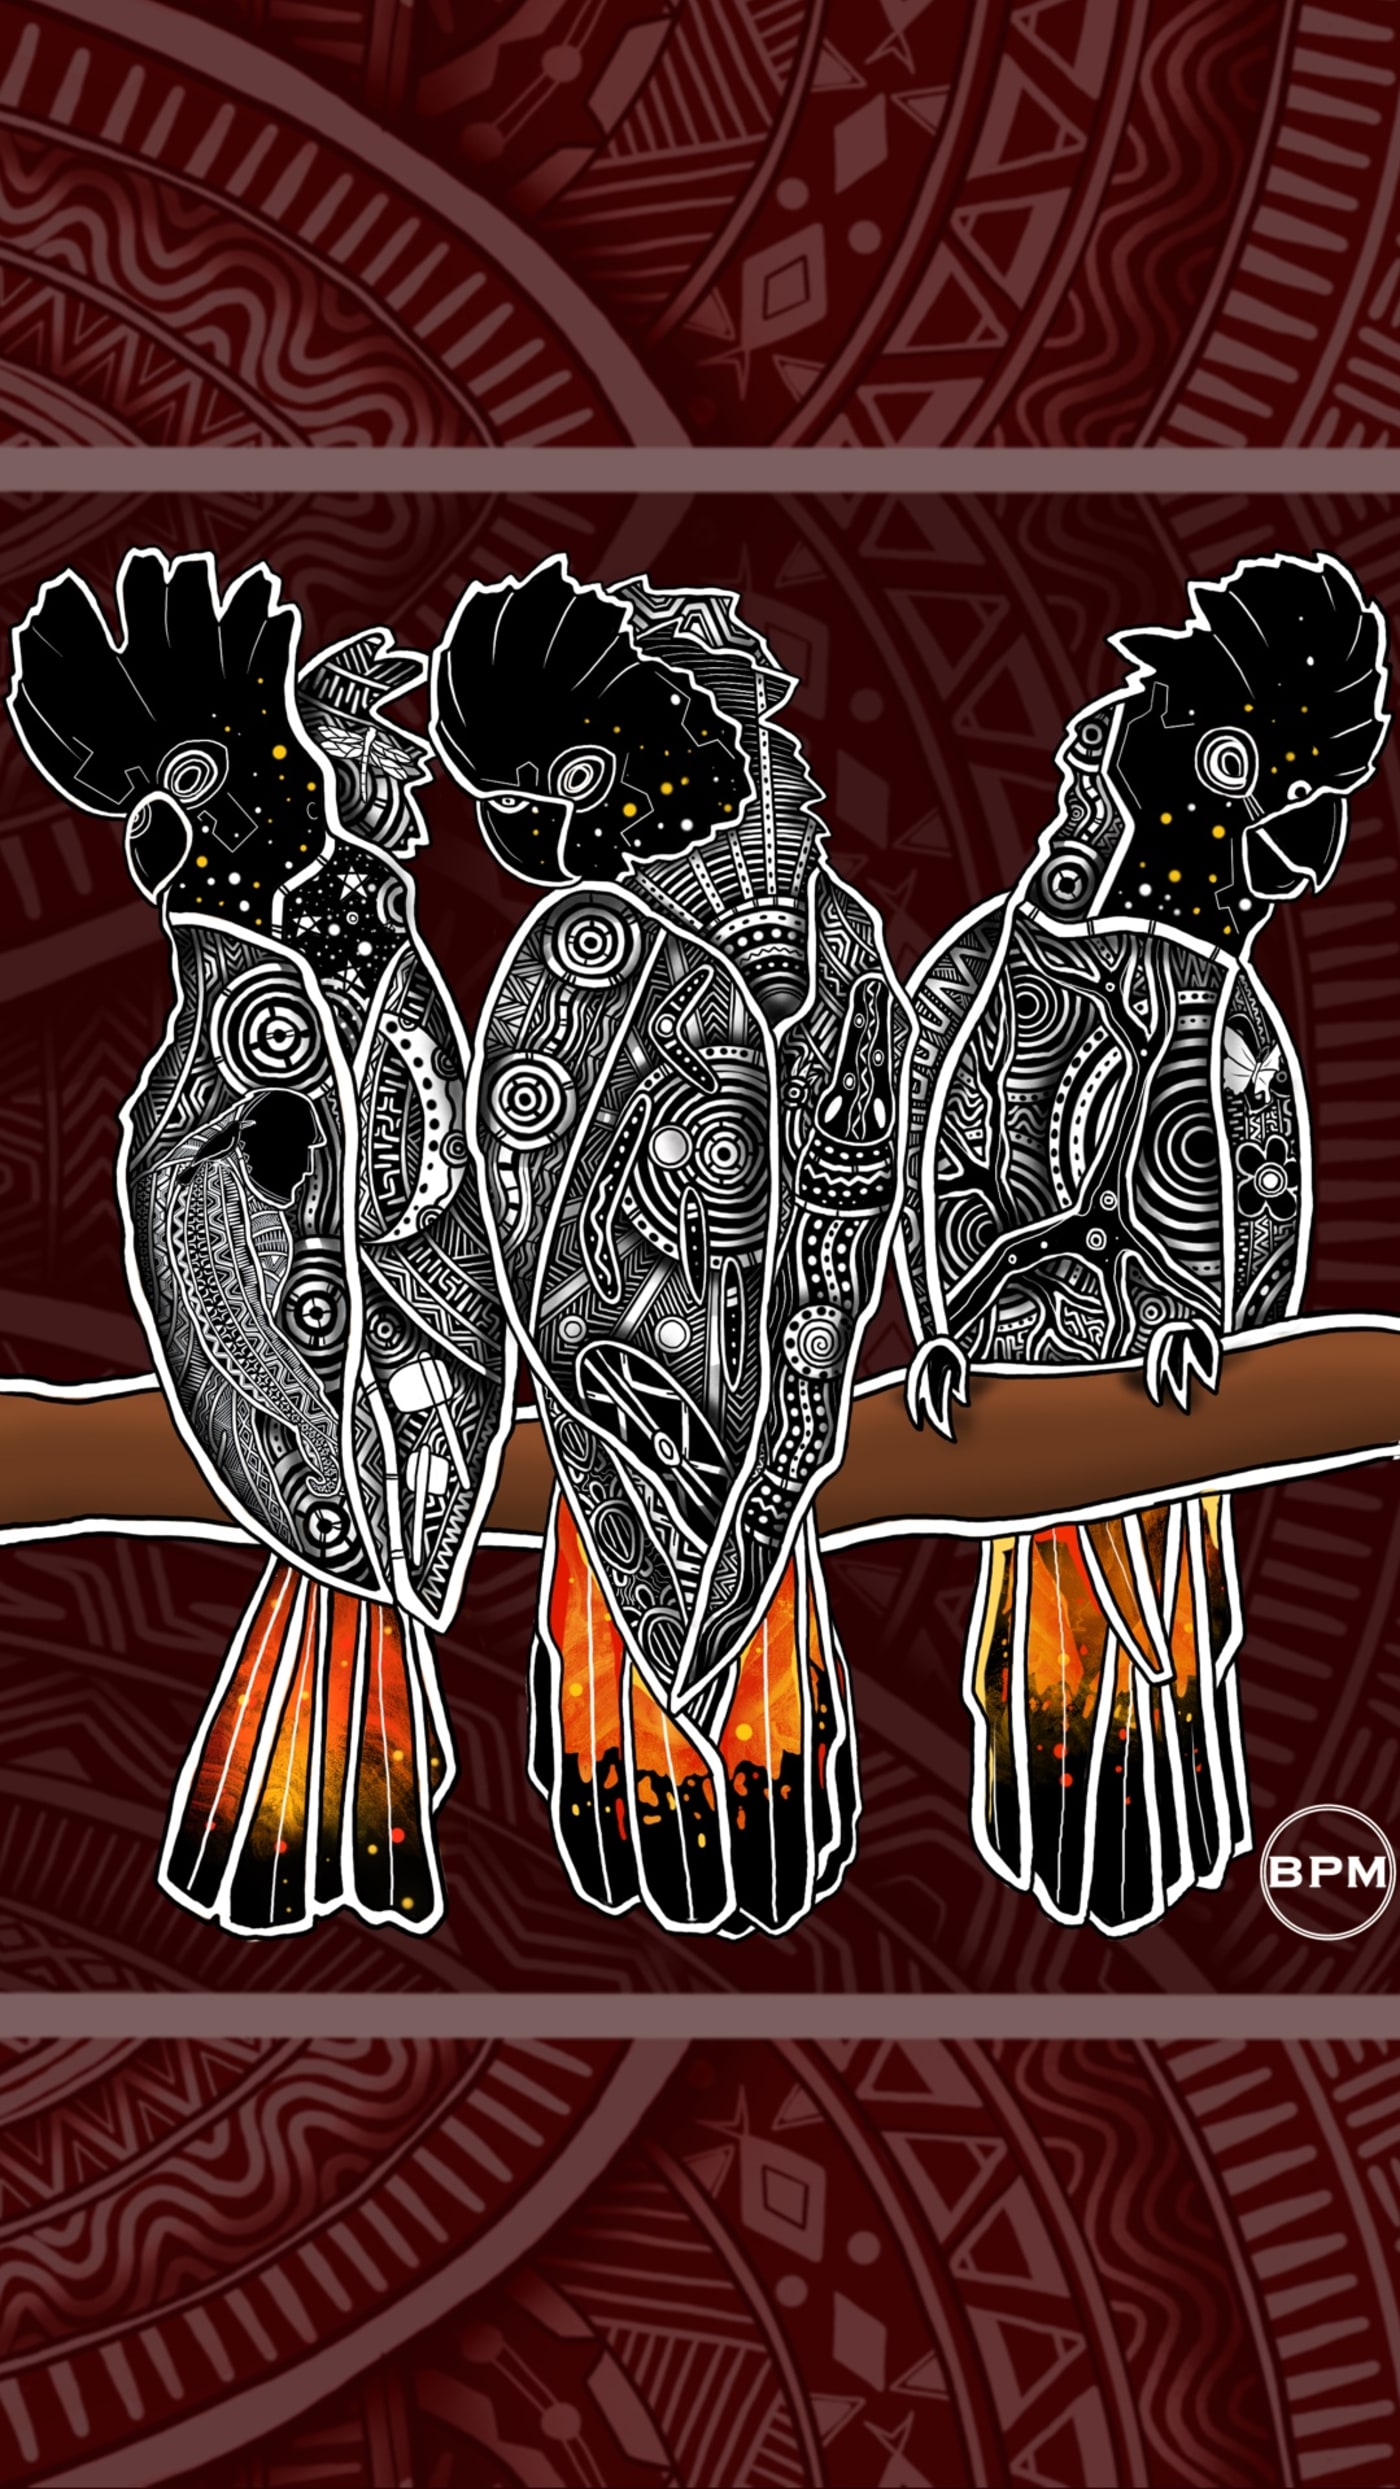 Indigenous Glossy Black Cockatoo Art Mobile Wallpaper from Beau Pennefather-Motlop